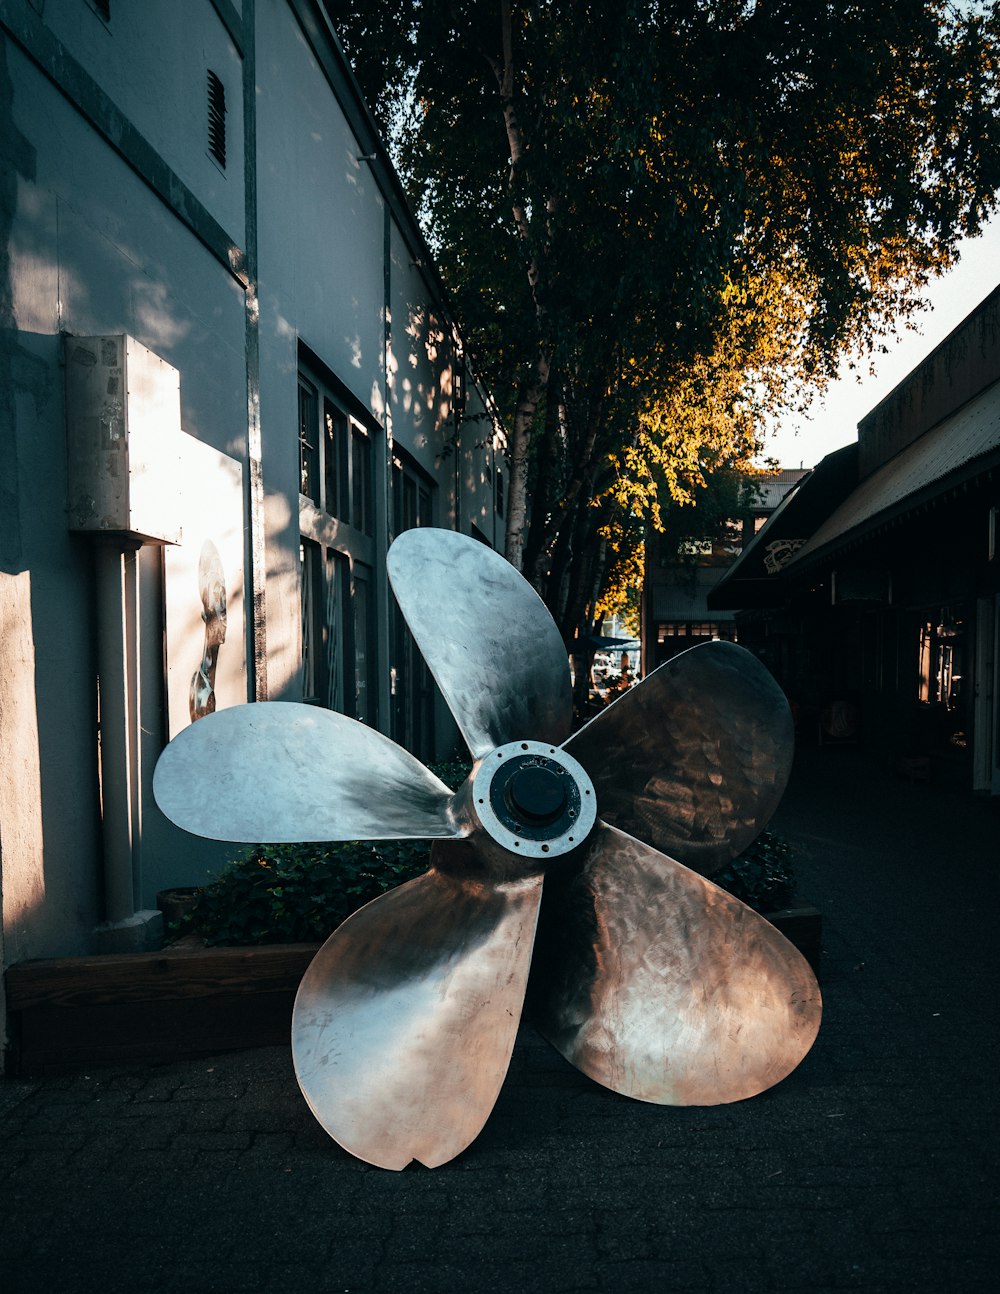 a large metal propeller sitting in front of a building